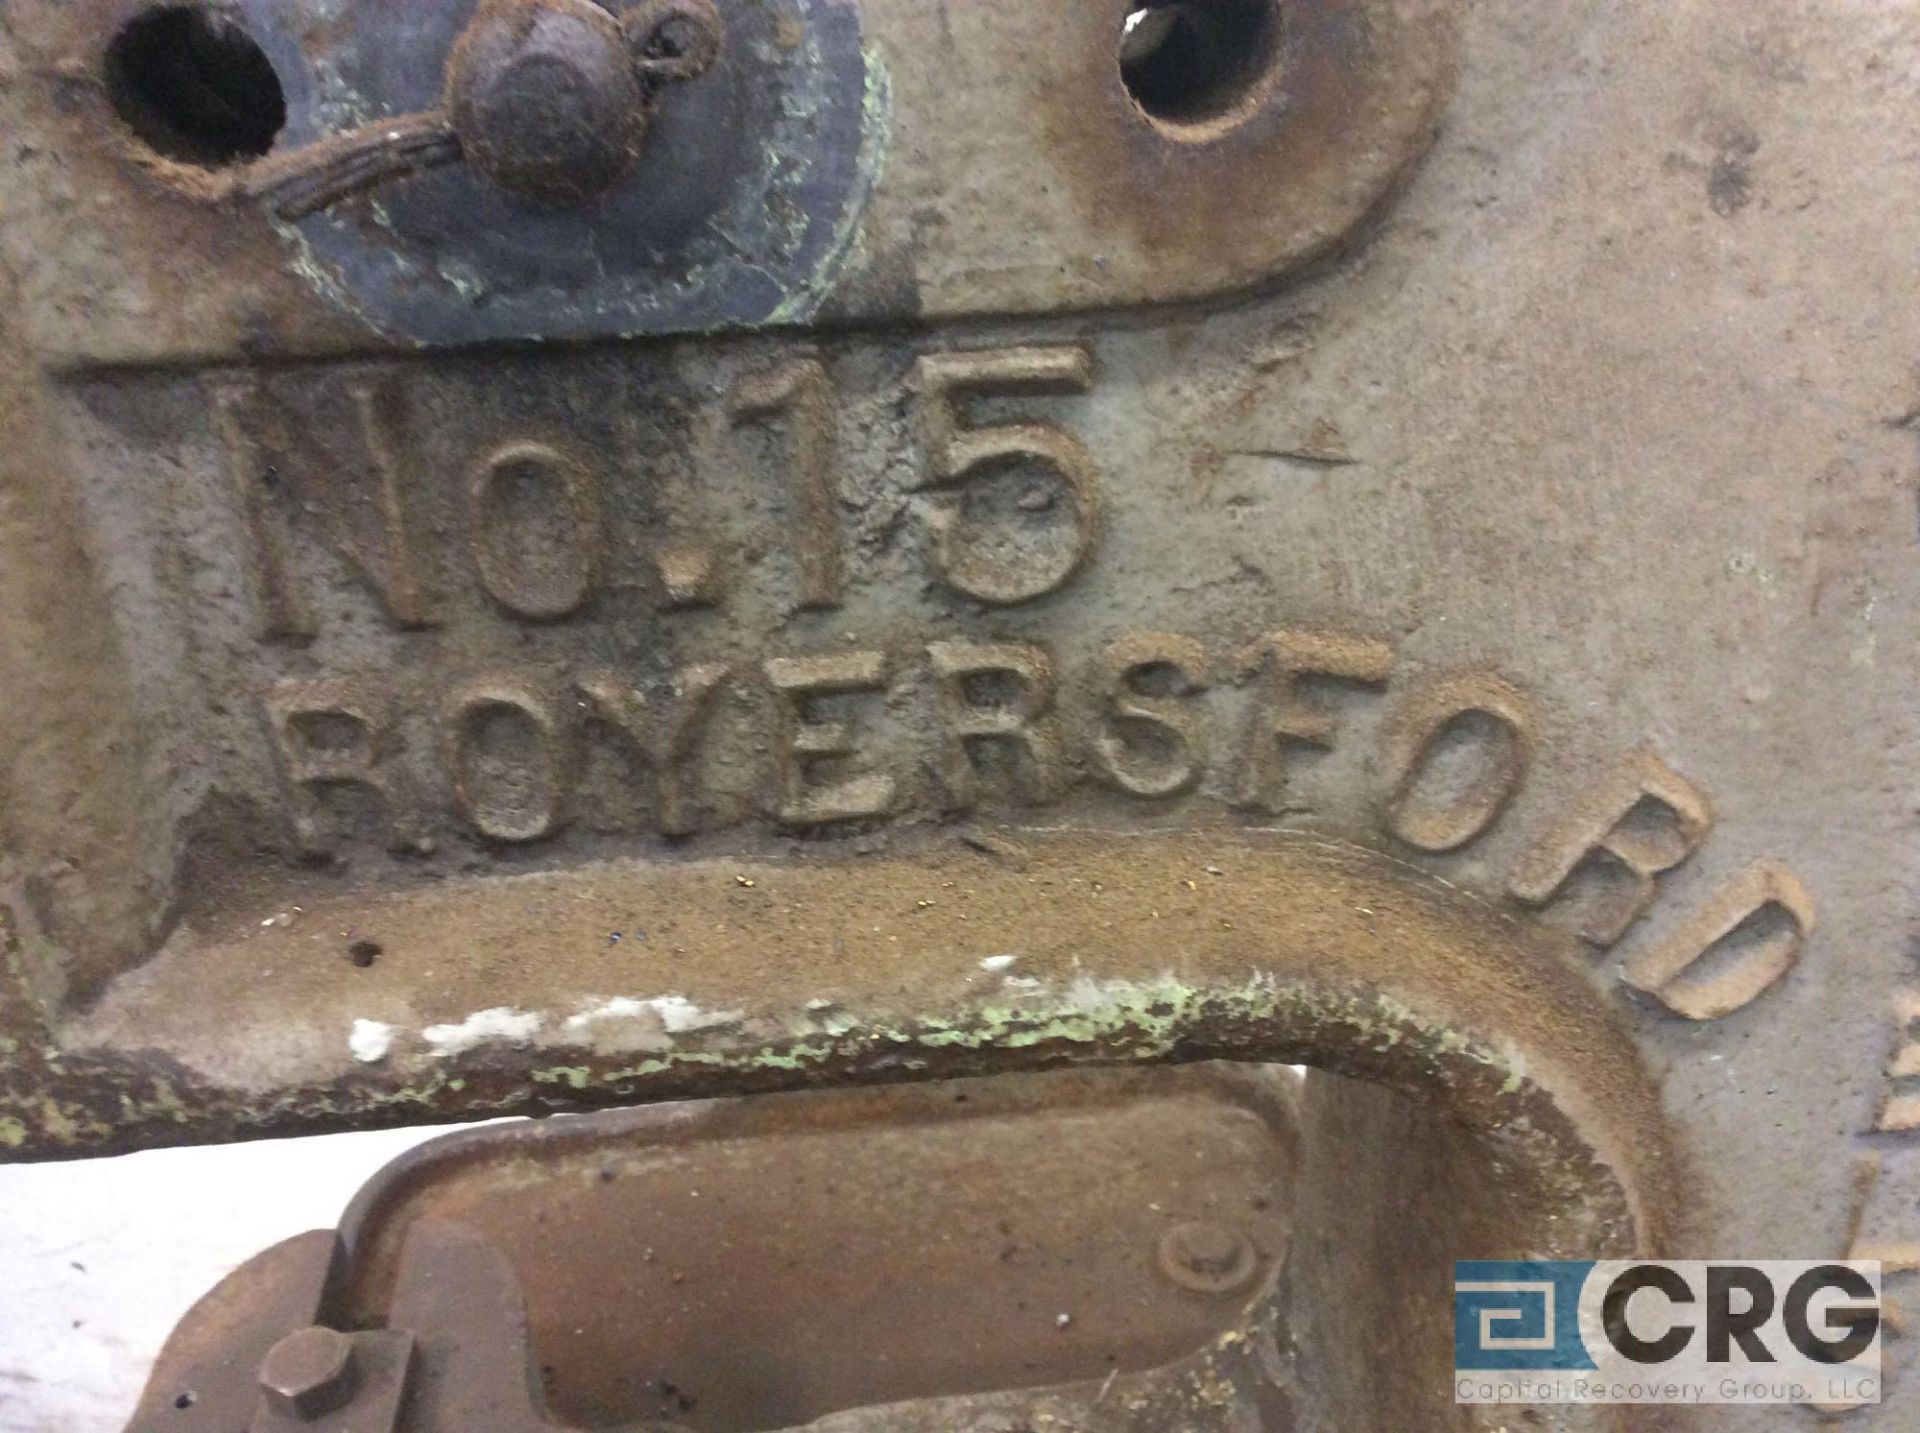 Excelsior Royersford kick press, mn 15, foot operated - Image 2 of 2